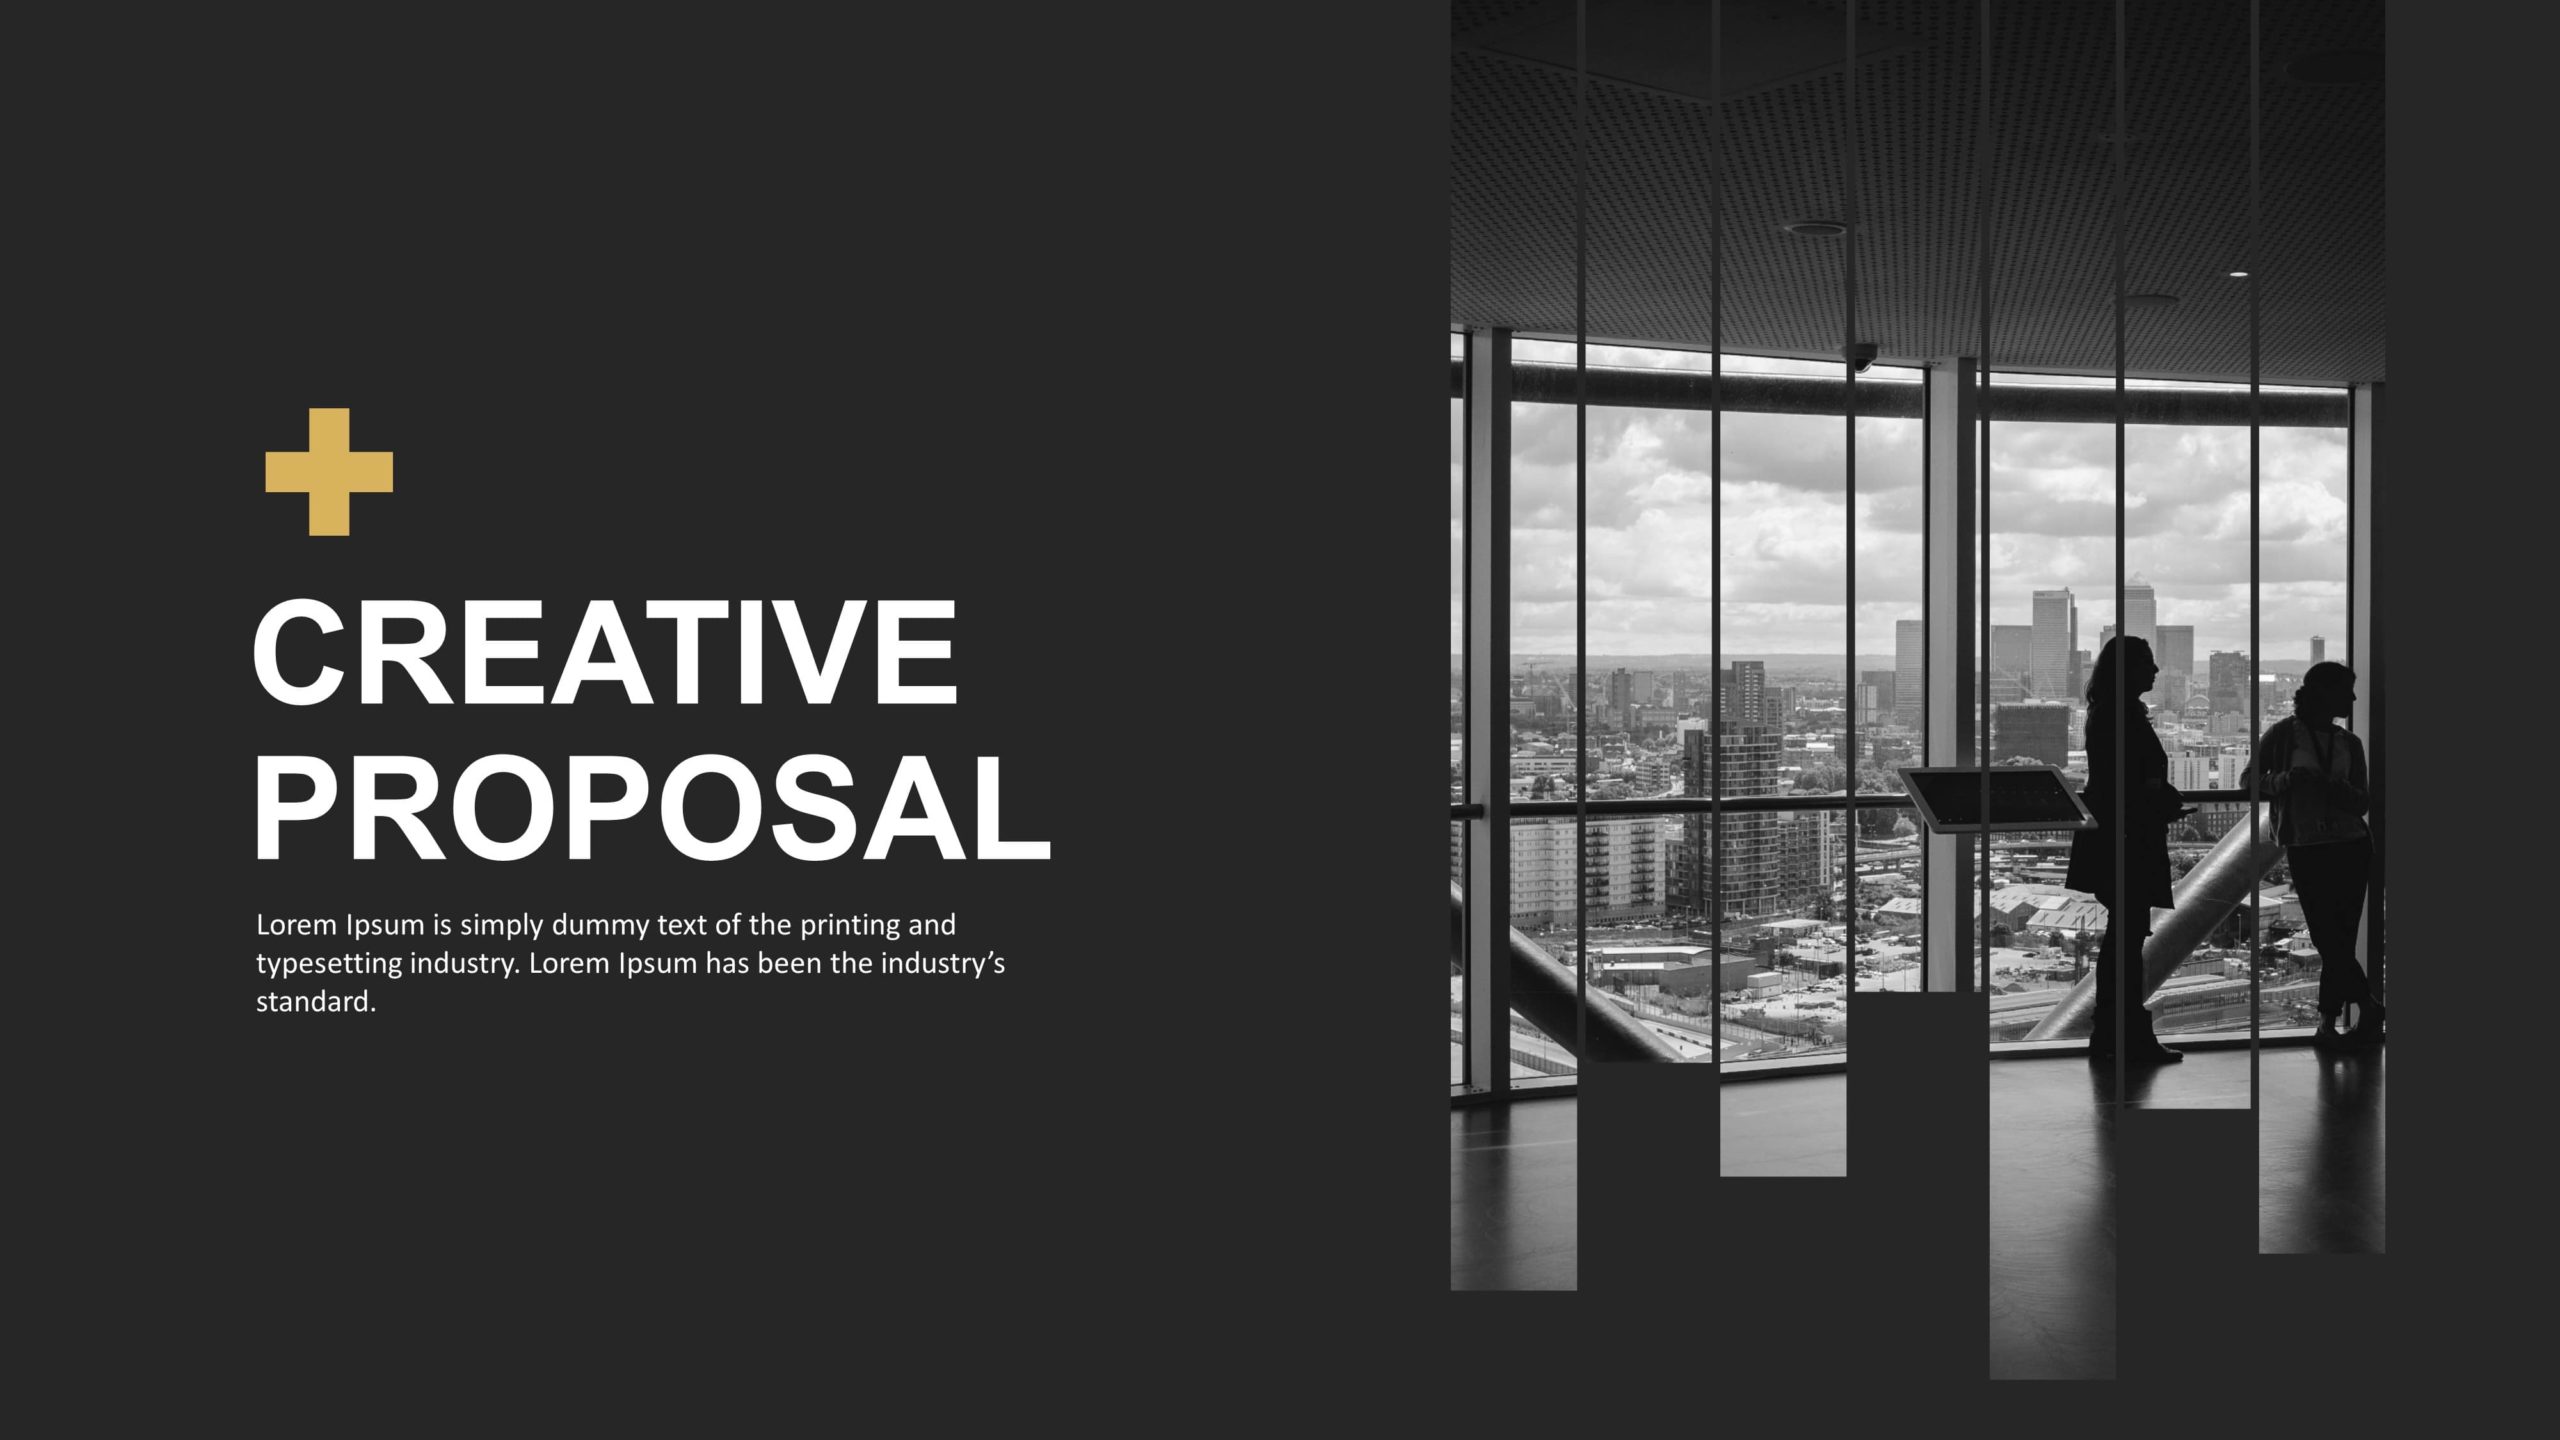 Creative Proposal PowerPoint Template